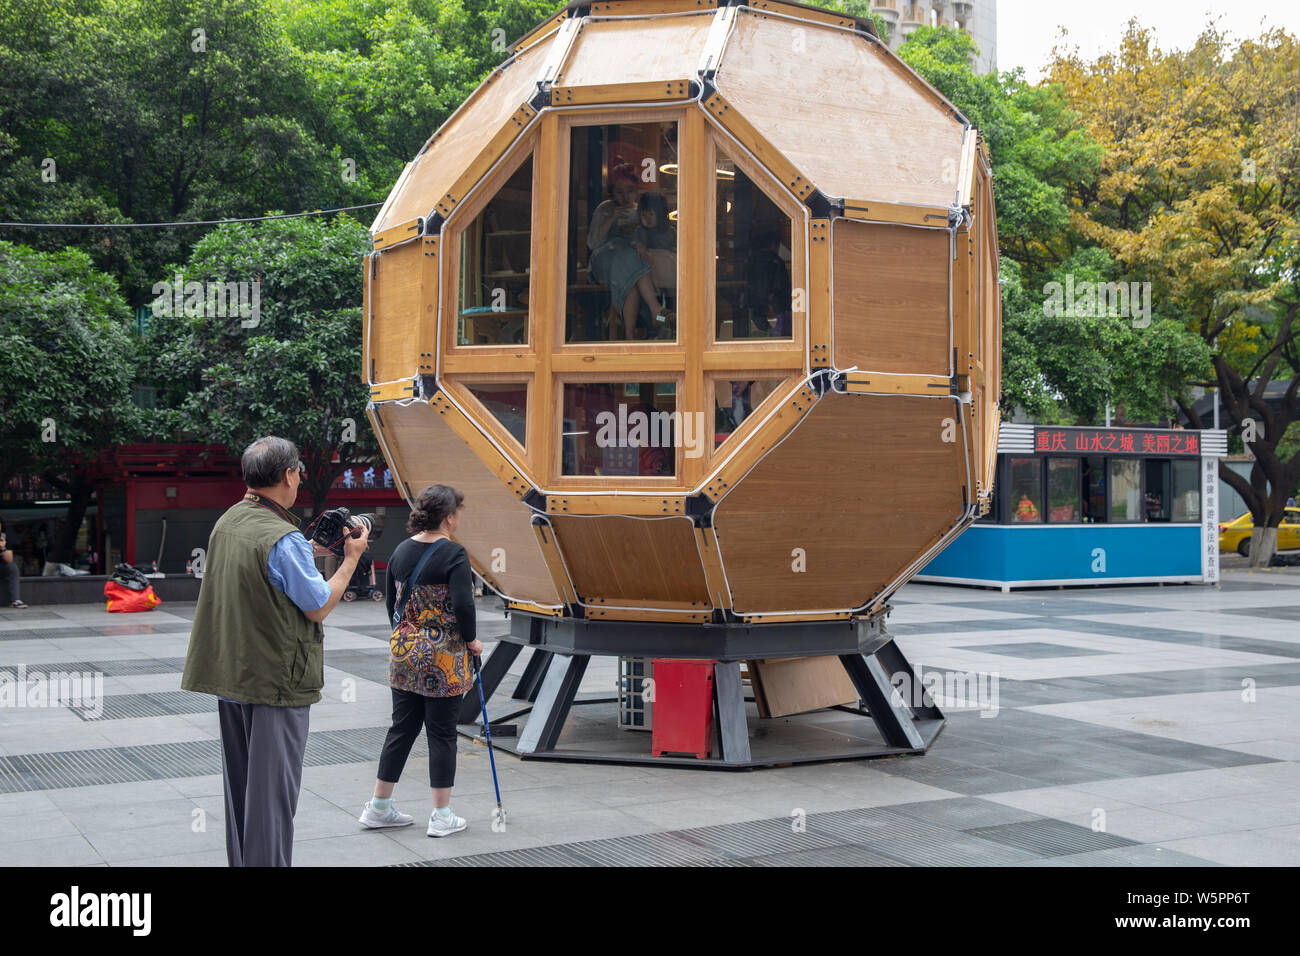 Pedestrians look at a bookstore featuring the shape of space capsule on a shopping street in Chongqing, China, 5 May 2019. Stock Photo